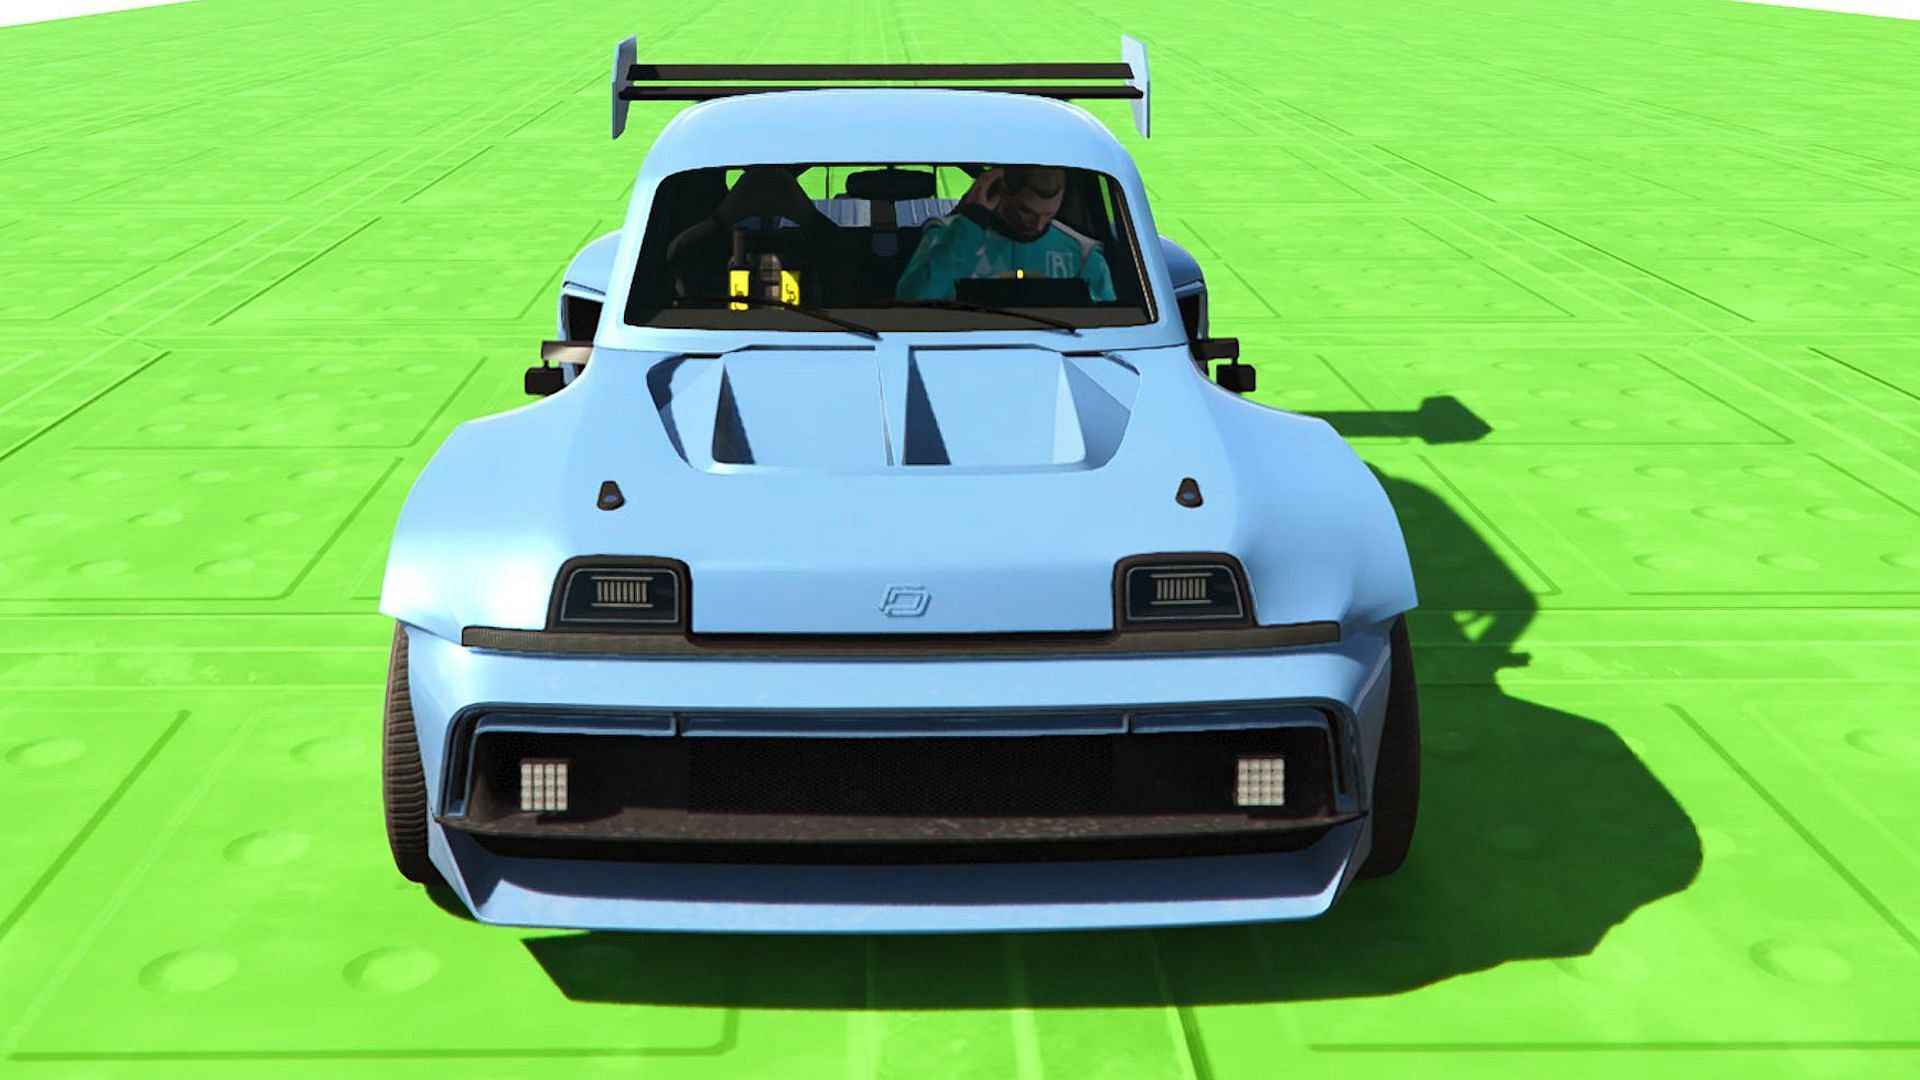 The Penaud La Coureuse is the final new car to discuss here (Image via Rockstar Games)